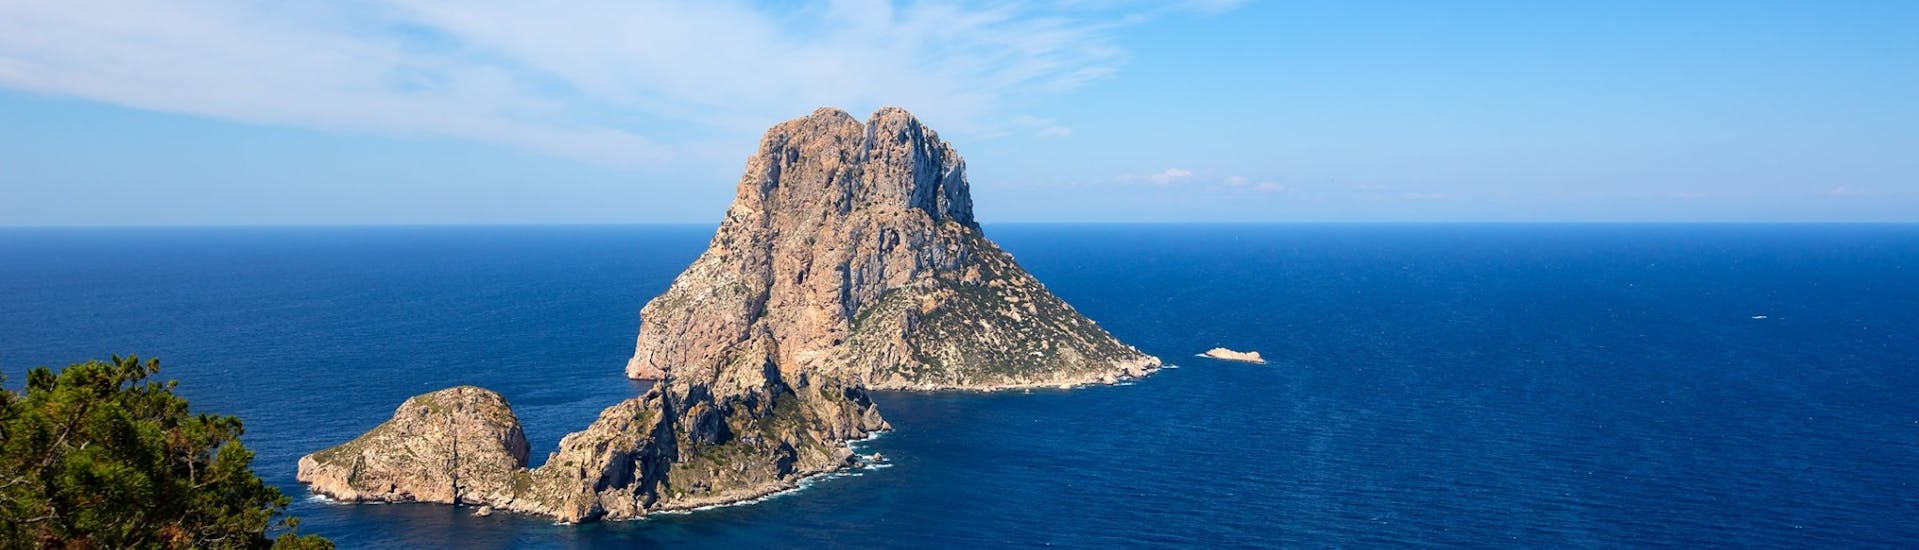 The Islet of Secrets viewed from the sky during the Catamaran Trip to Es Vedrà with Apéritif with Sea Experience Ibiza.